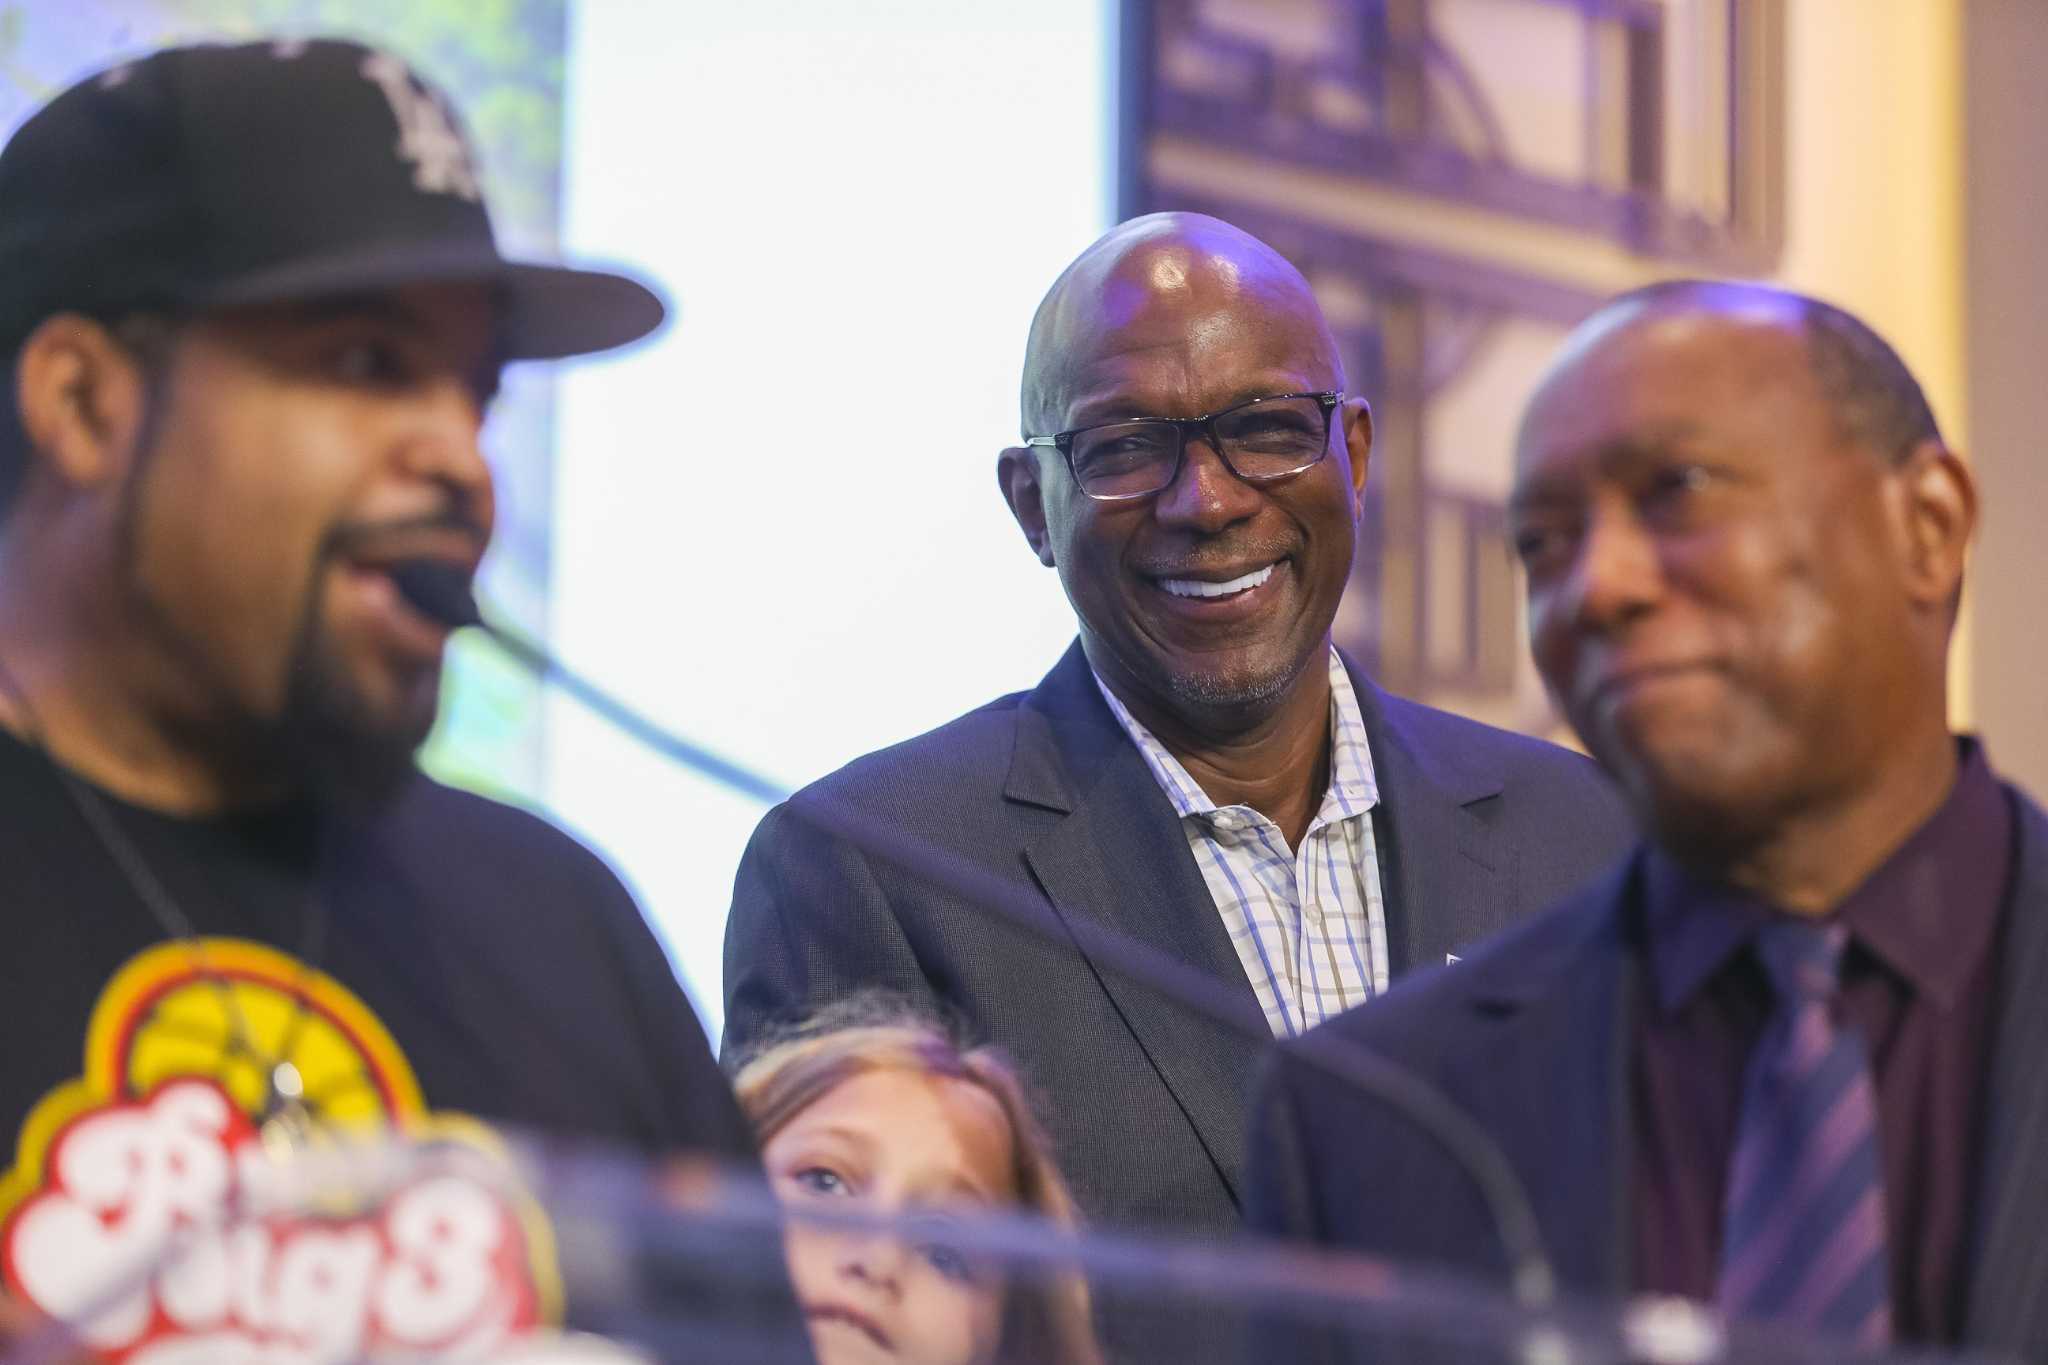 George Gervin spent his summer as head coach of BIG 3 Basketball's